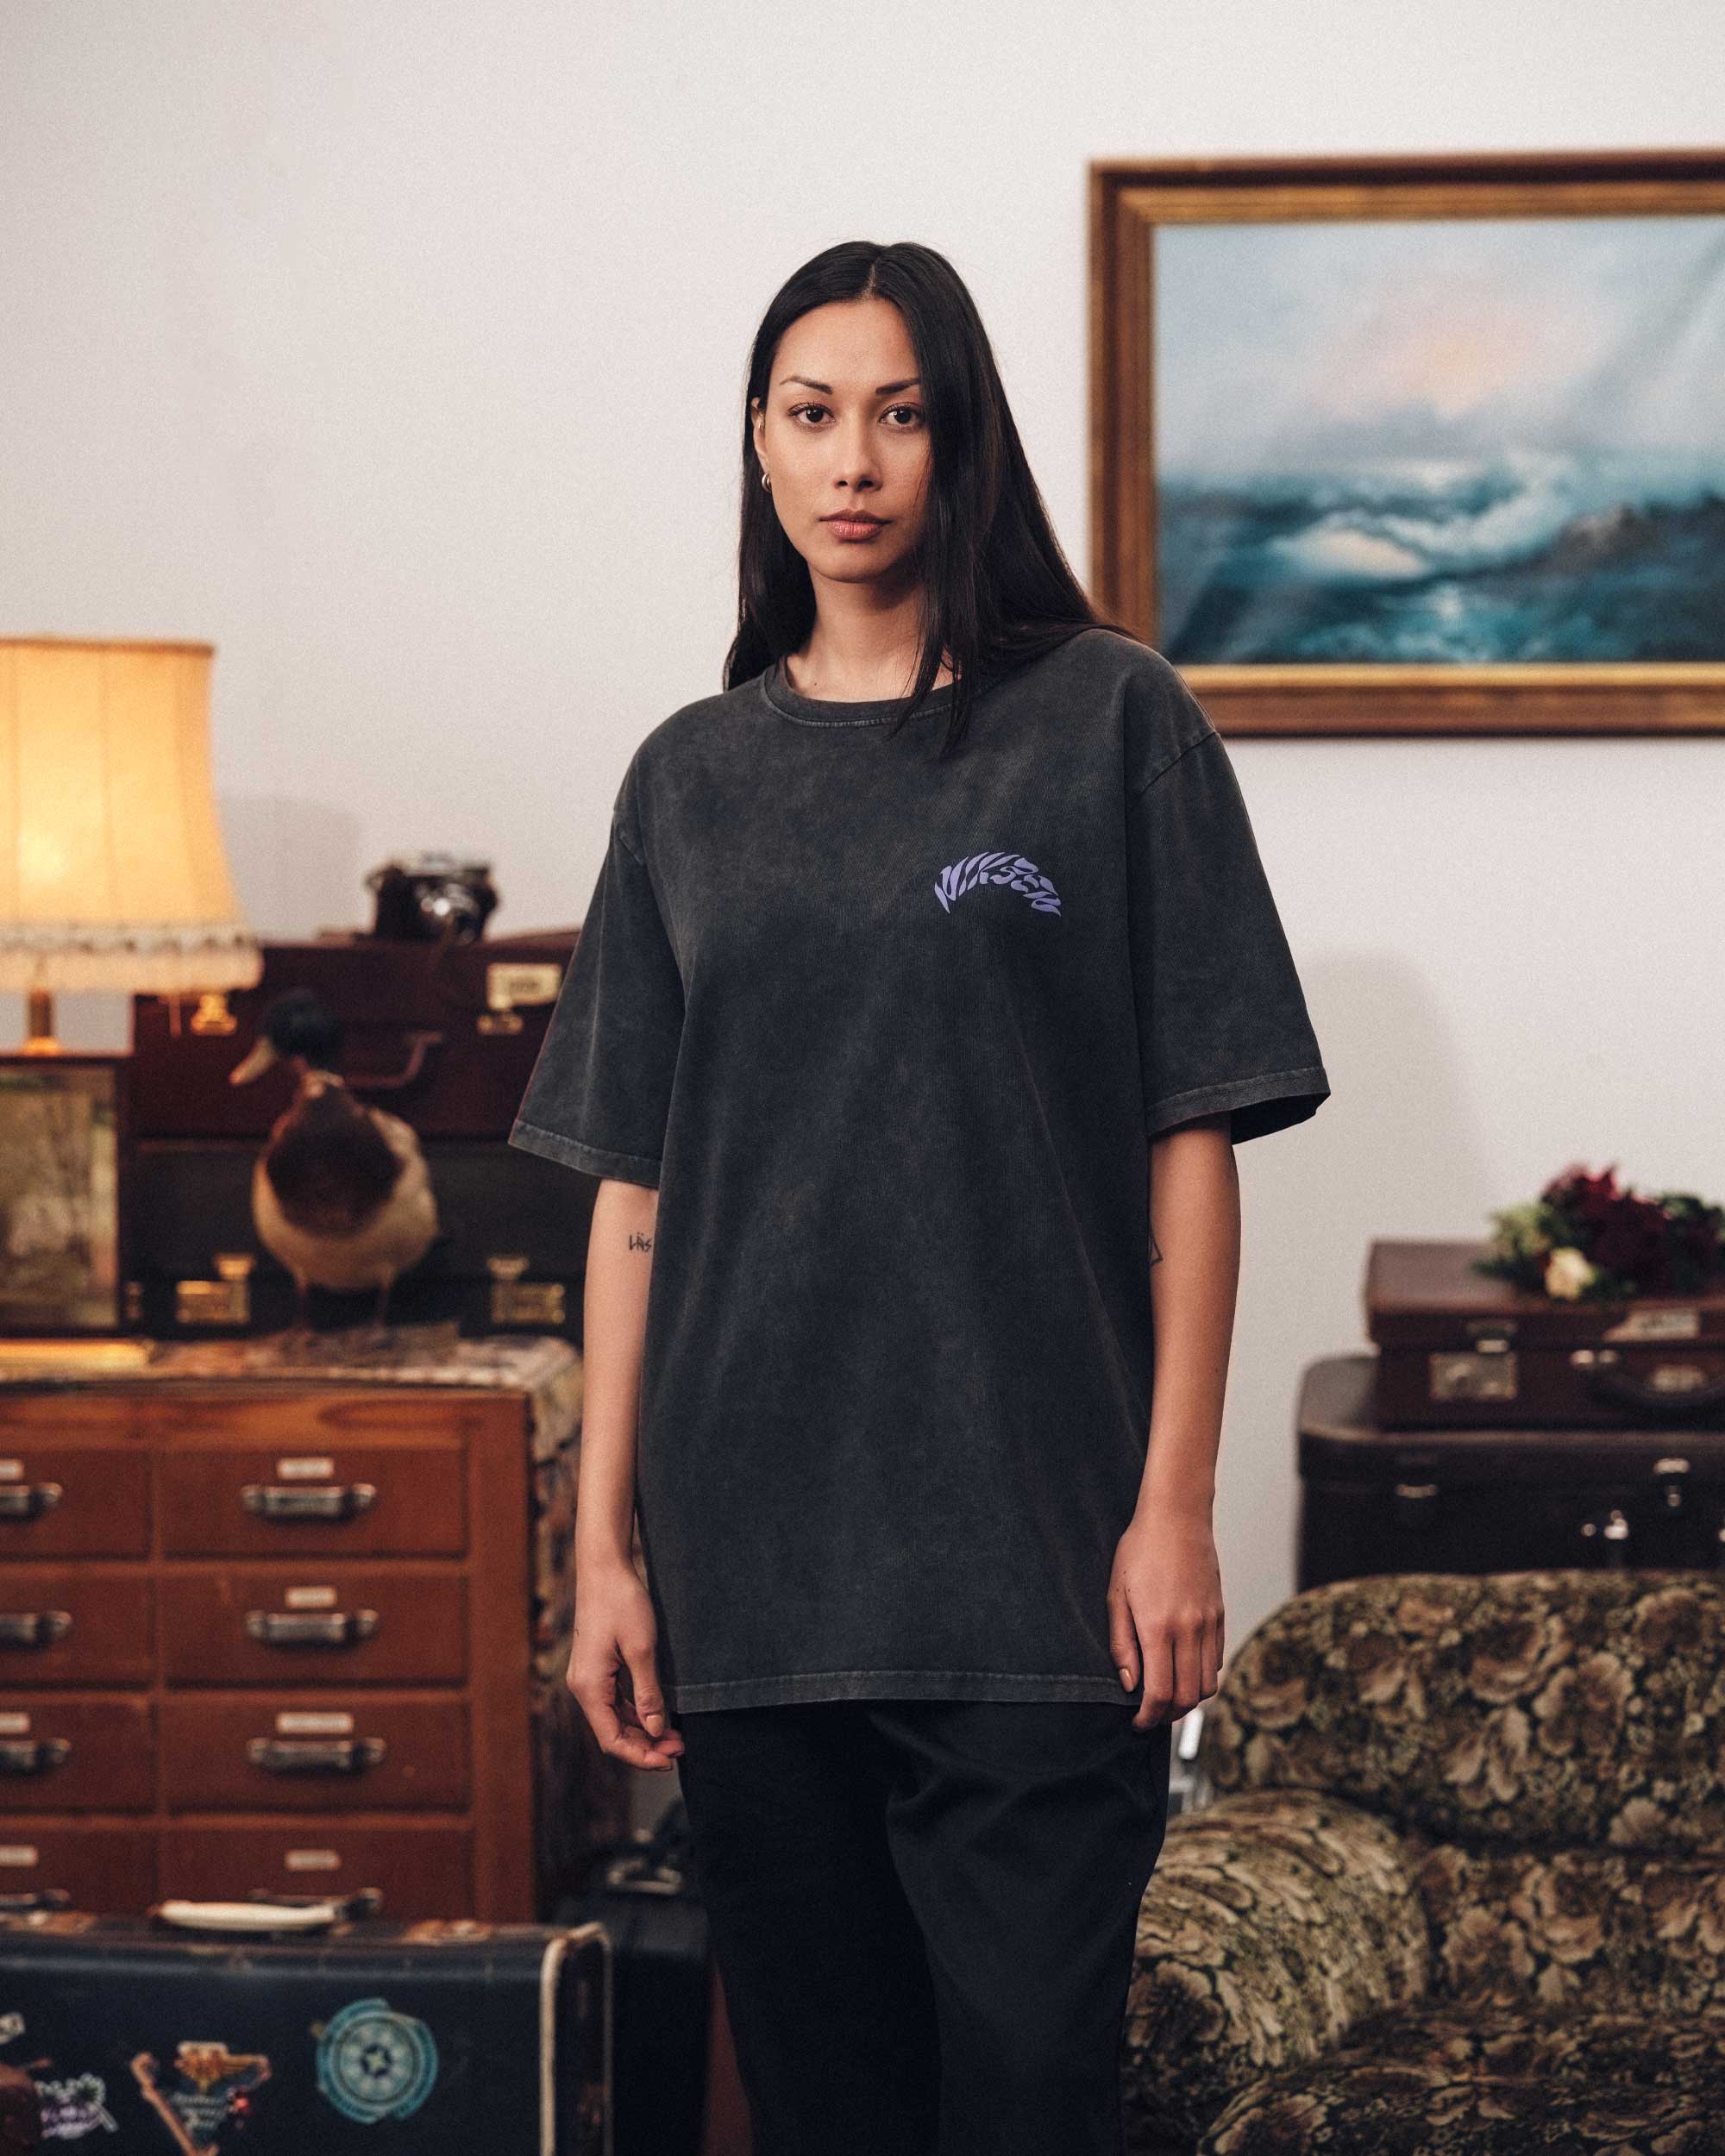 Female model wearing a washed black t-shirt with purple 